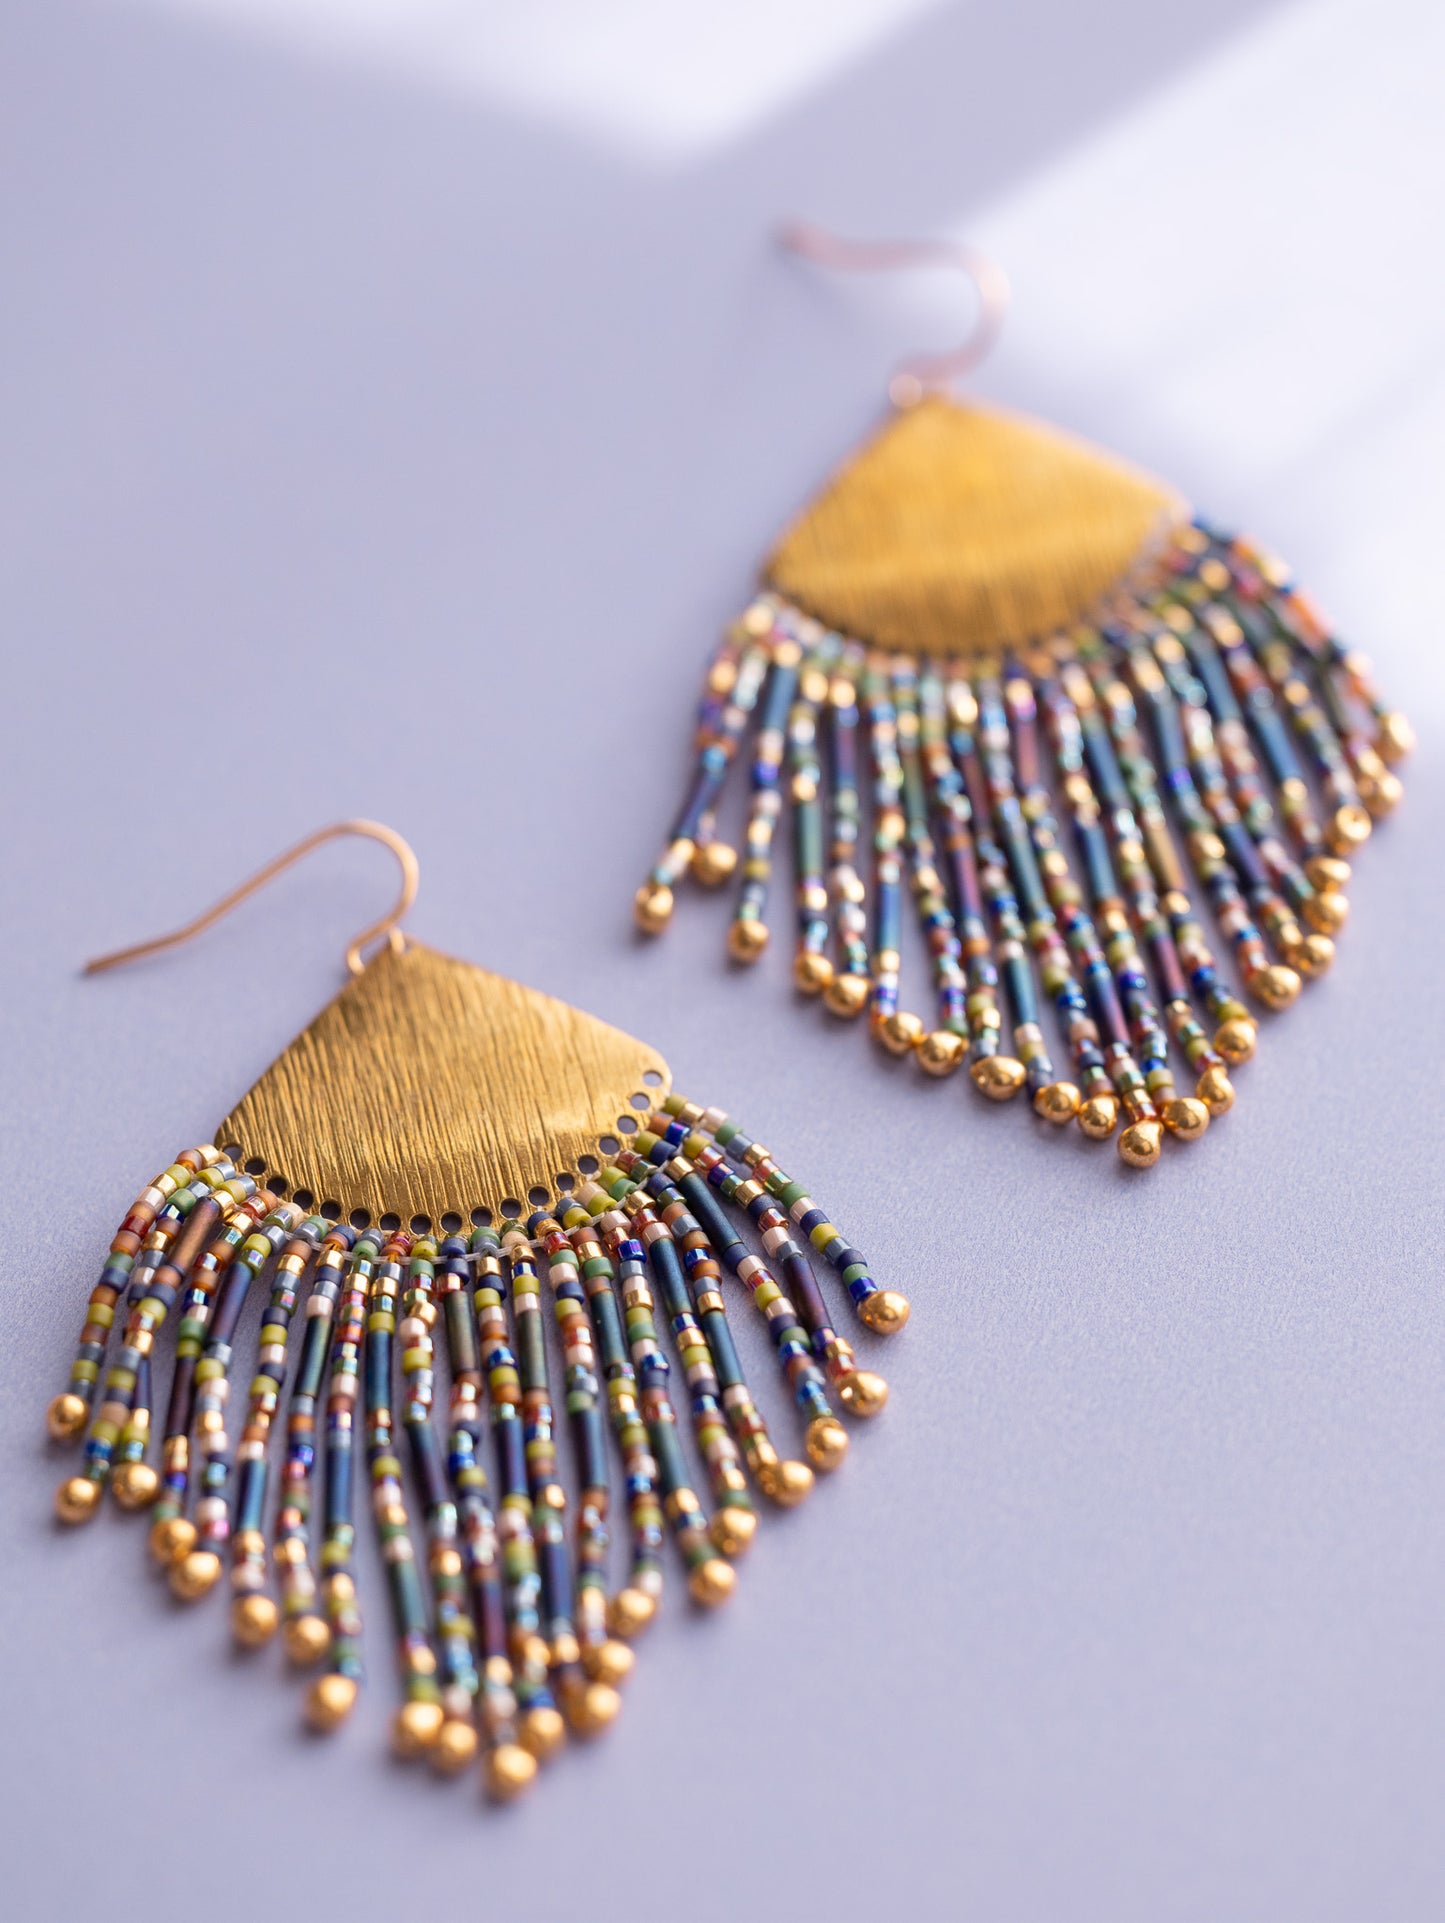 Gold beaded fringe earrings with multi colored beads.